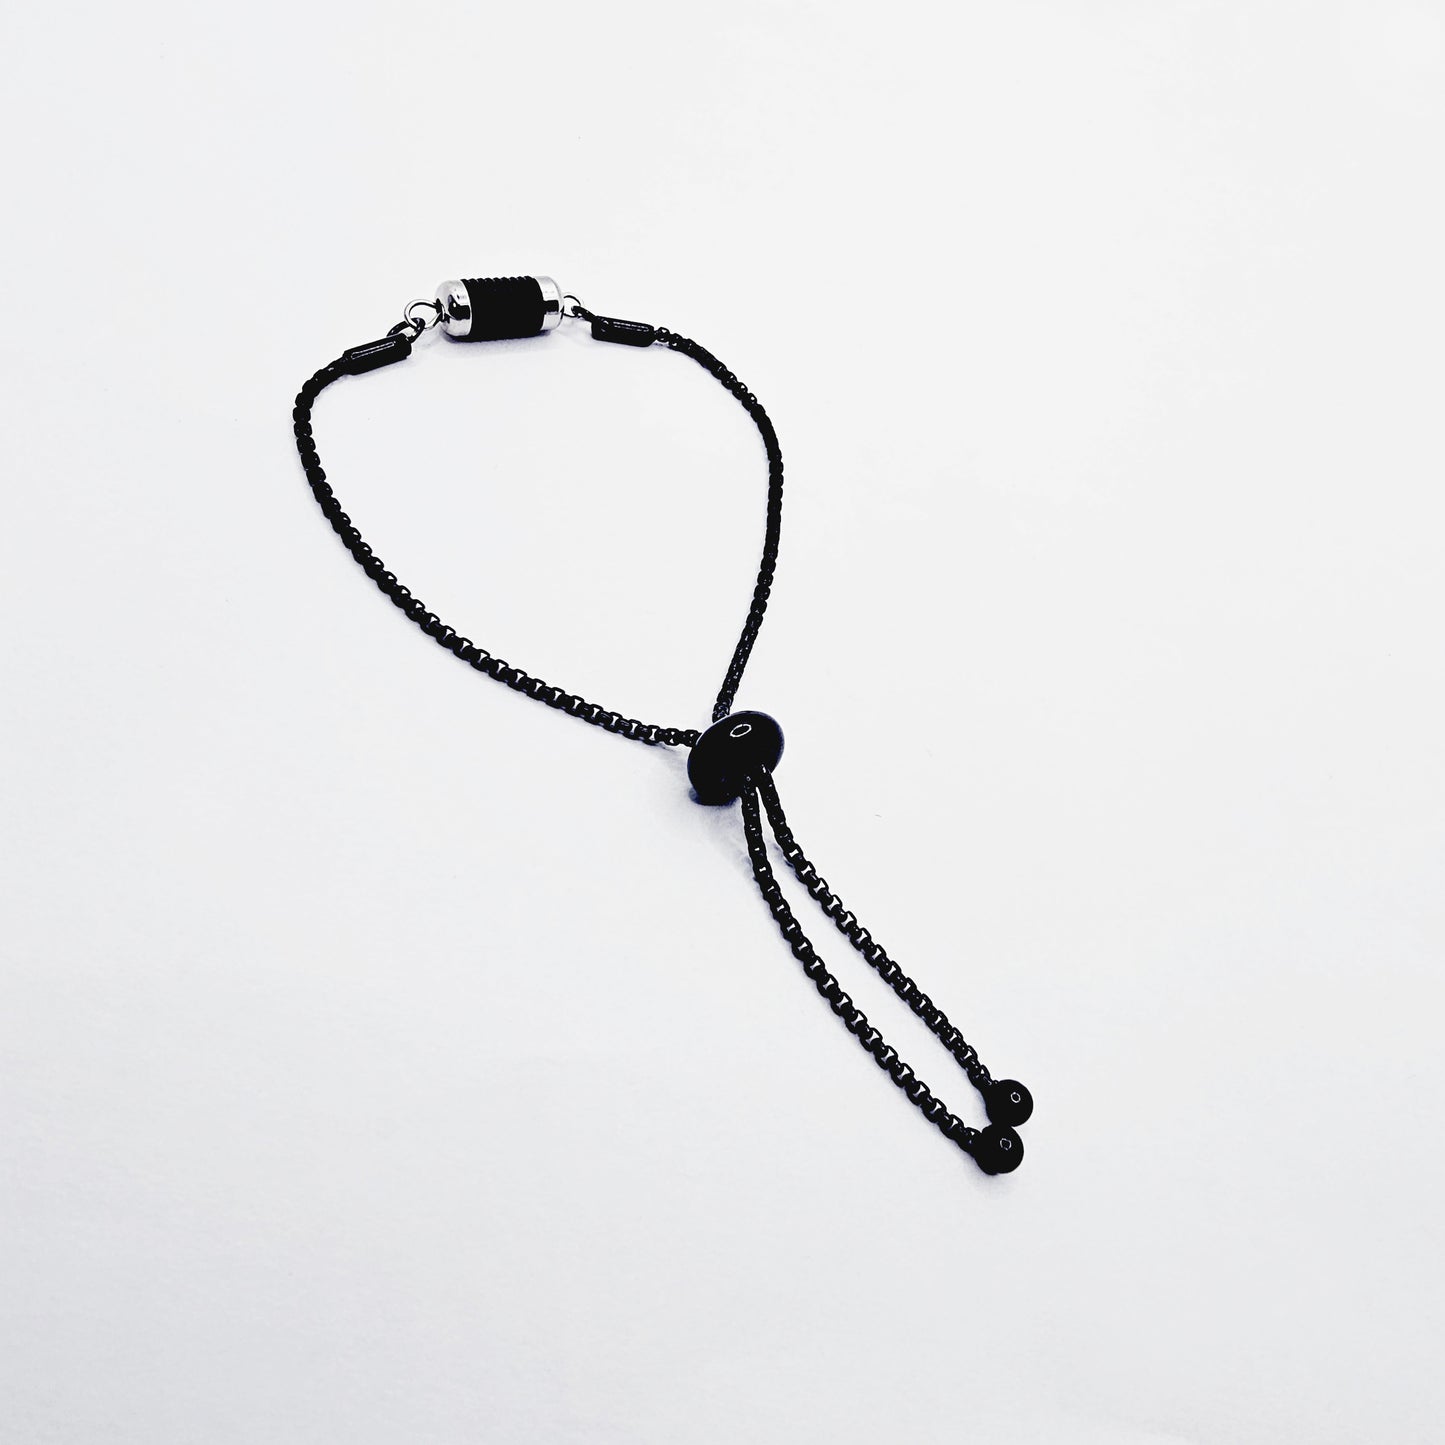 Penis Chain Noose Bracelet. Black Stainless Steel Adjustable Bolo Style Cock Ring with Stimulating Barrel Roller